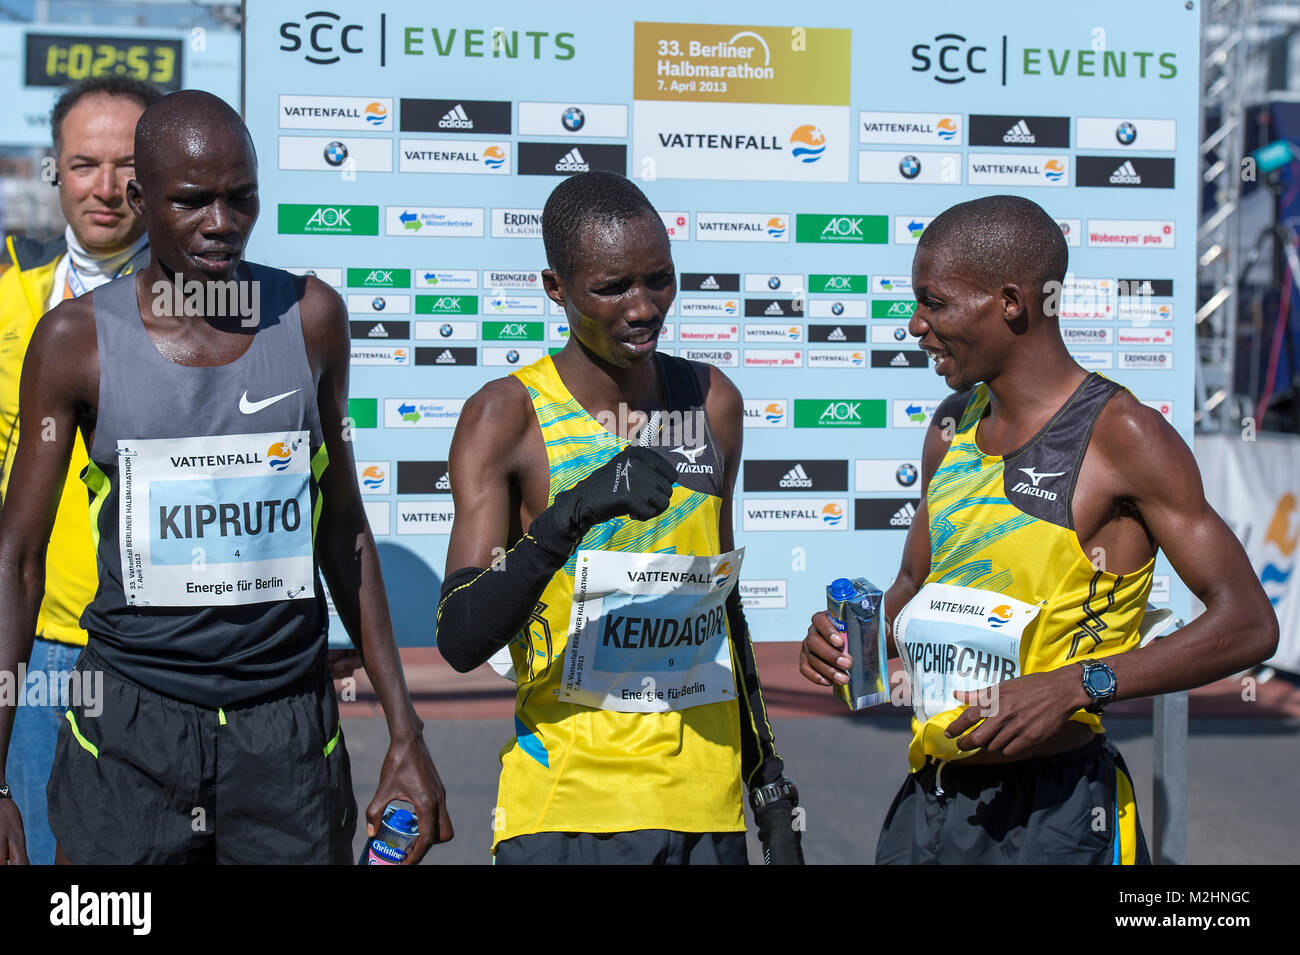 Berlin Half Marathon 2013 with victory in the category of Kenyans man, Jacob Kendagor 59:11 minutes in  1st and 2nd Silas Kipruto with 59:31 minutes and 3rd for Victor Kipchirchir with 59:39 minutes . Stock Photo